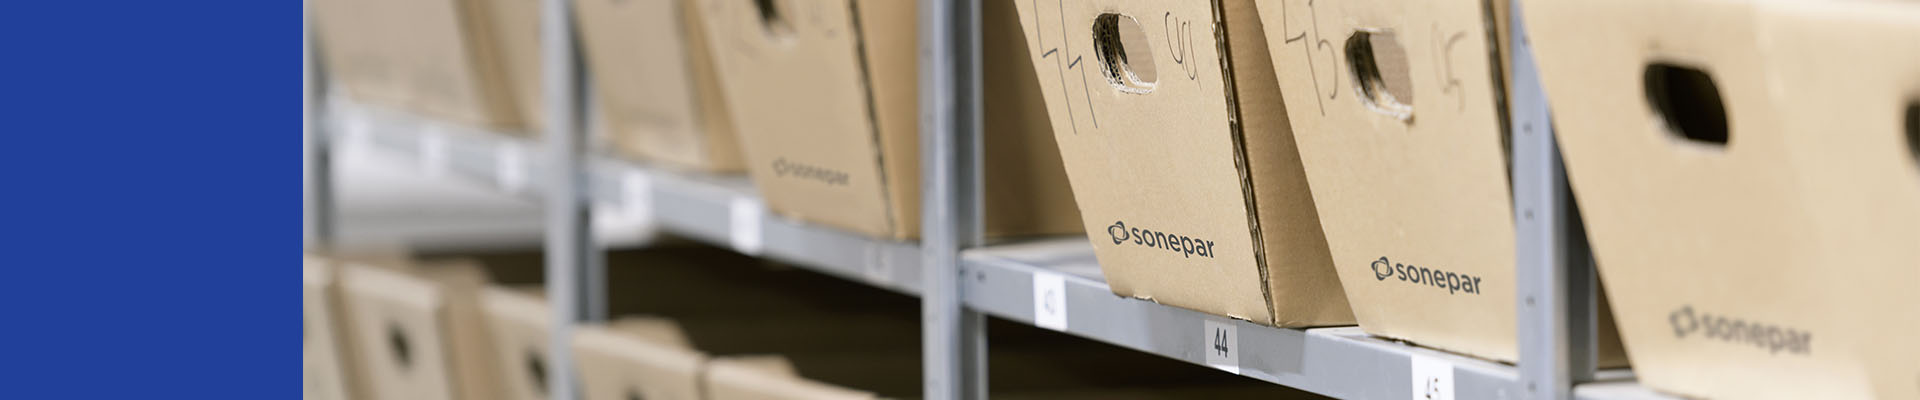 header-warehouse-product-boxes